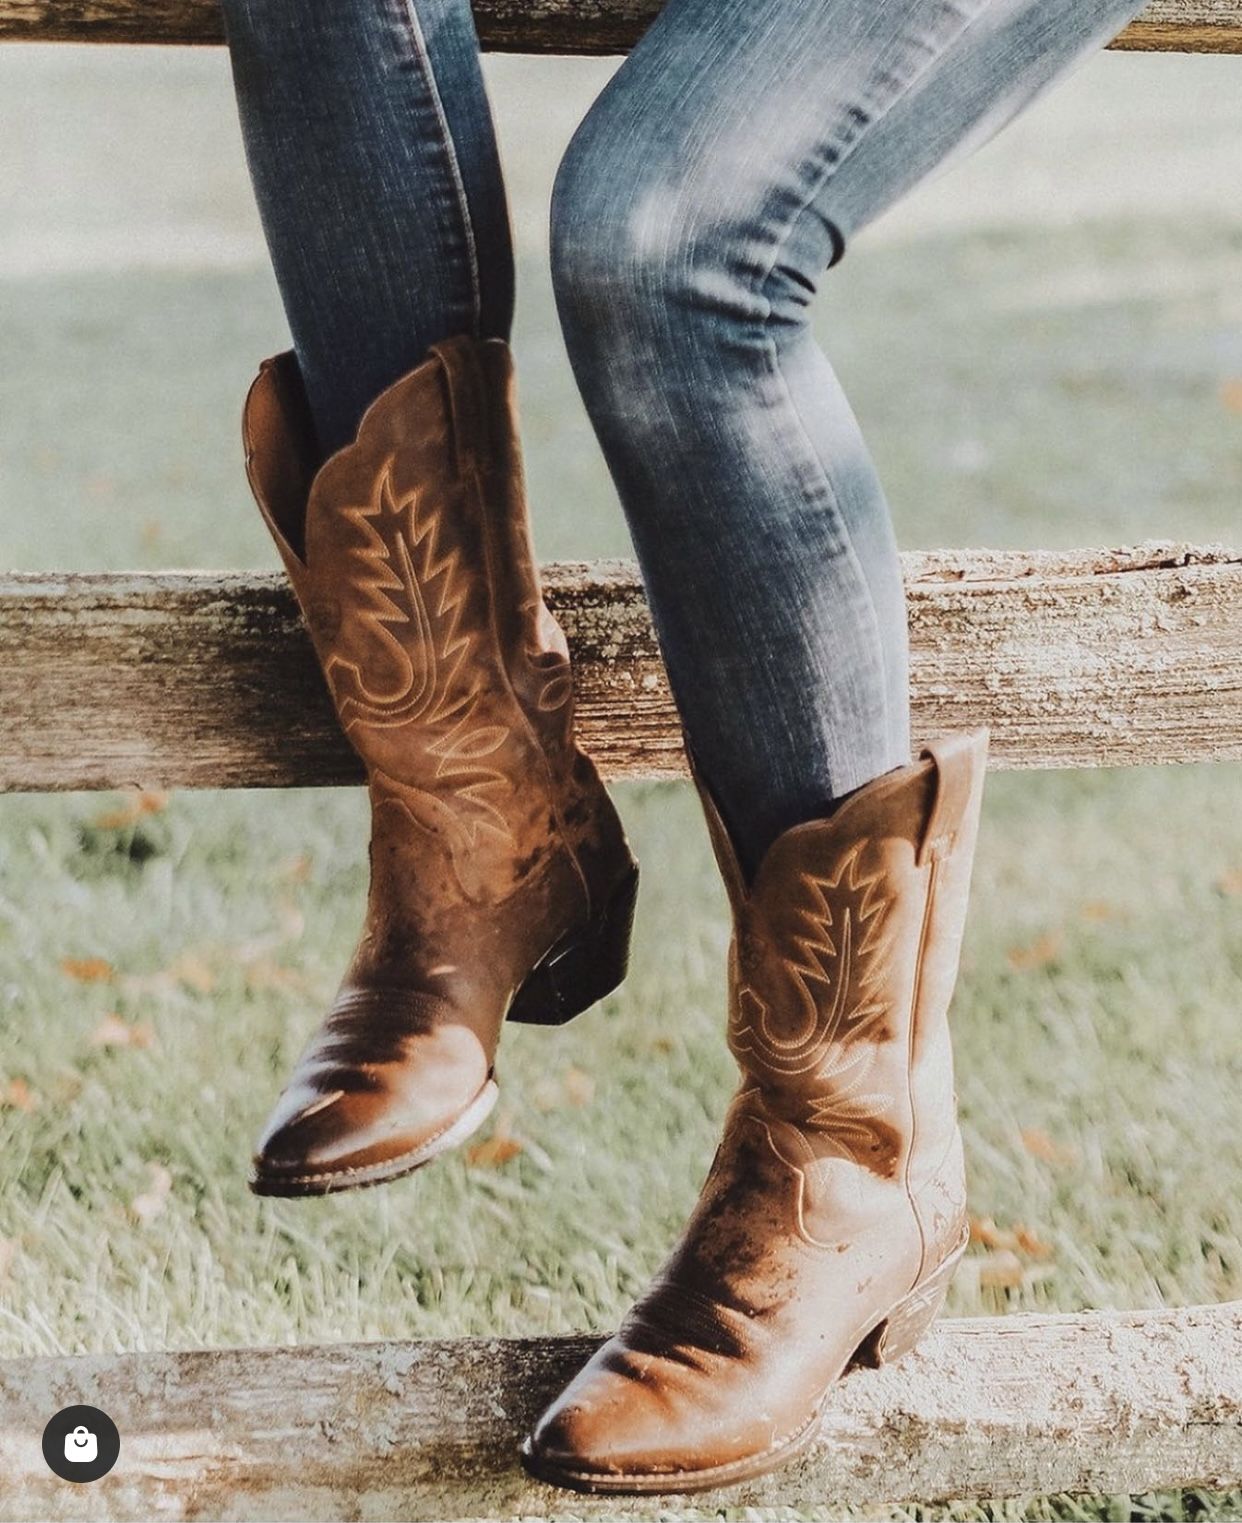 Wear Ariat boots women shoes in stylish
way